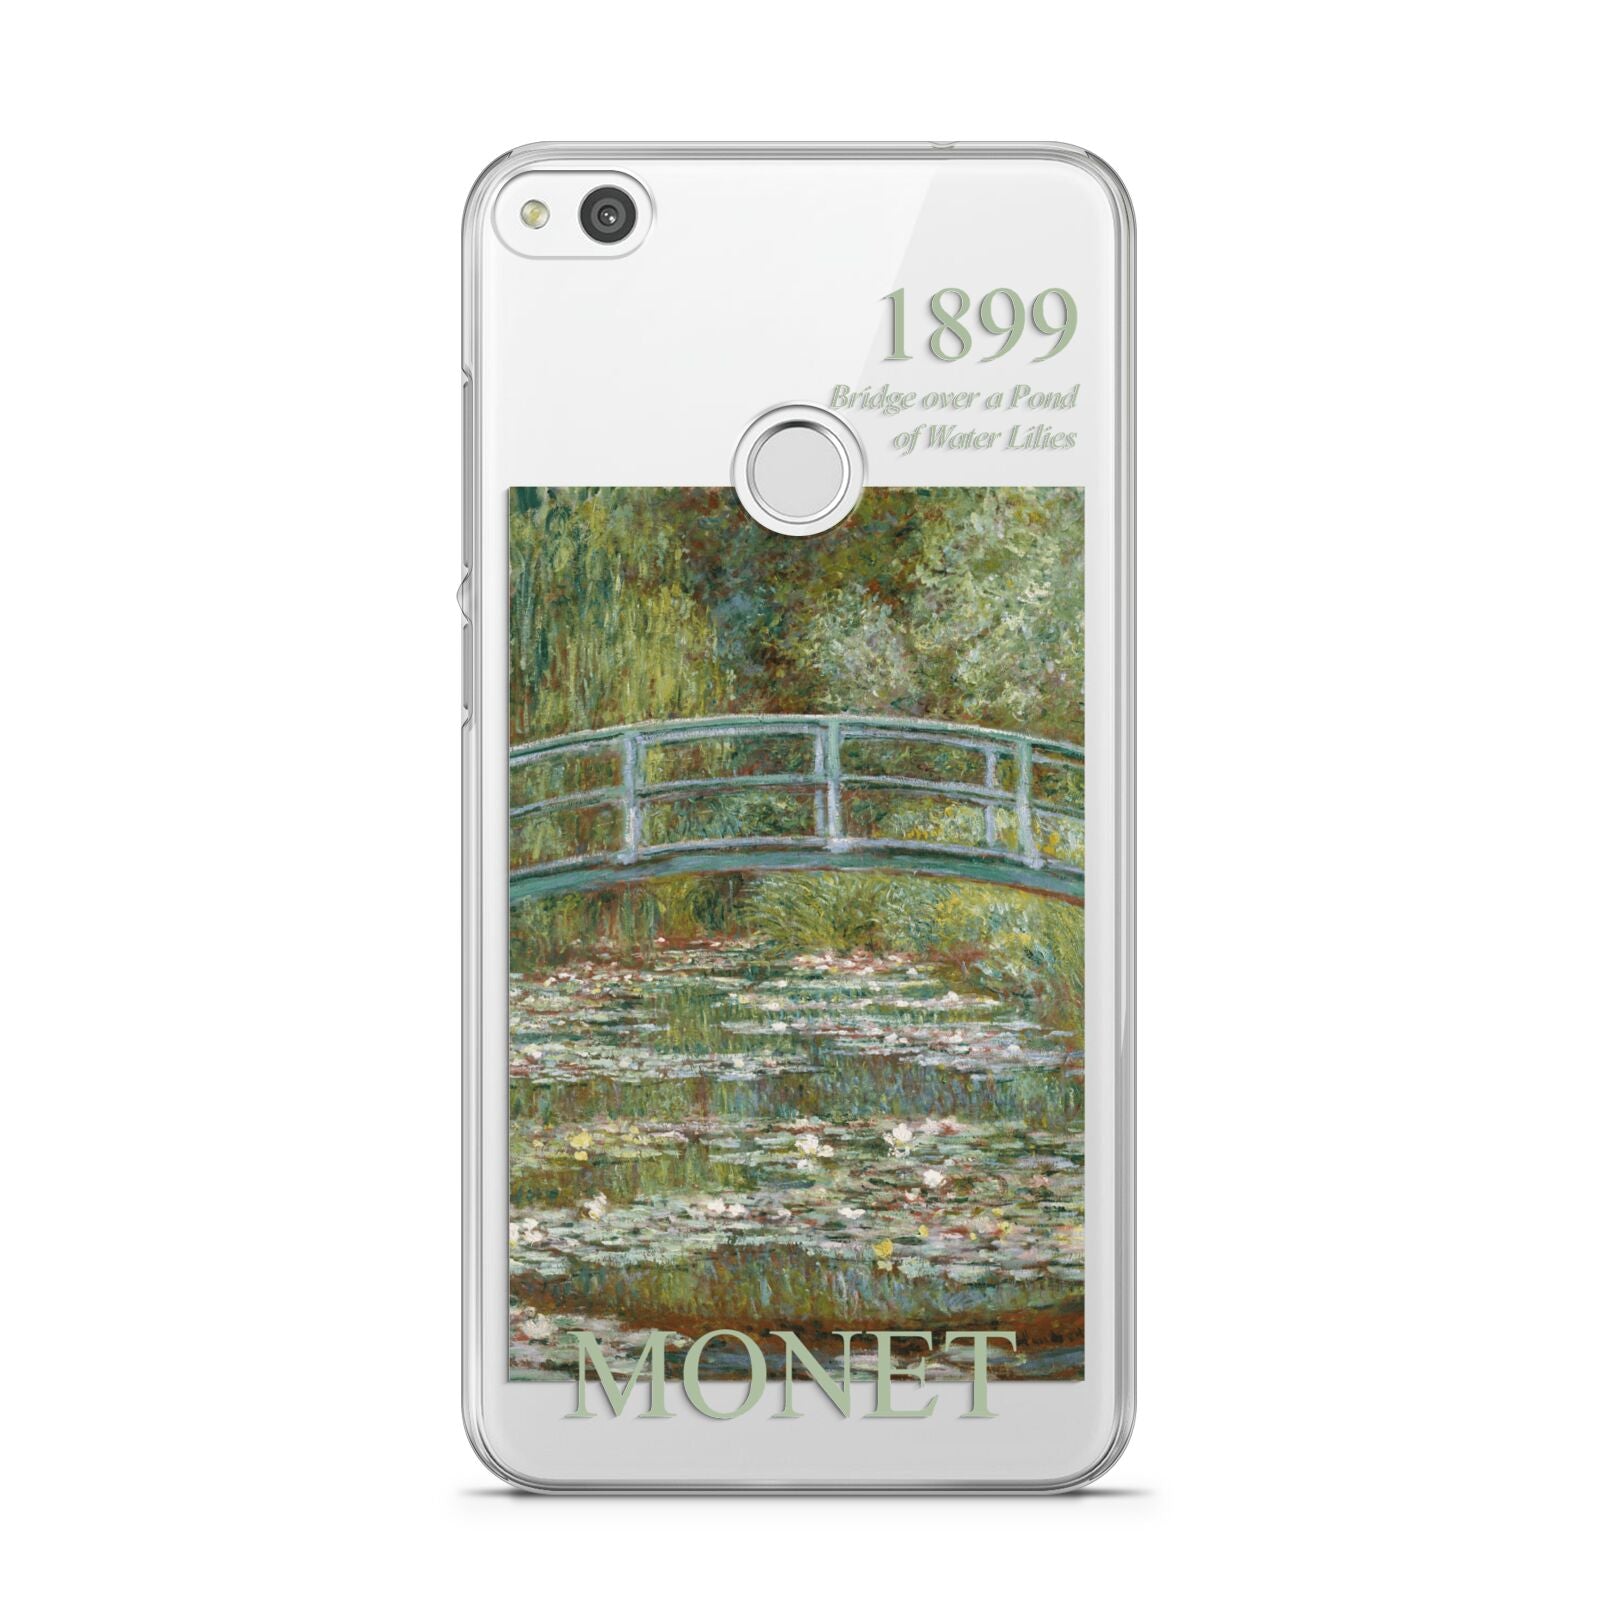 Bridge Over A Pond Of Water Lilies By Monet Huawei P8 Lite Case